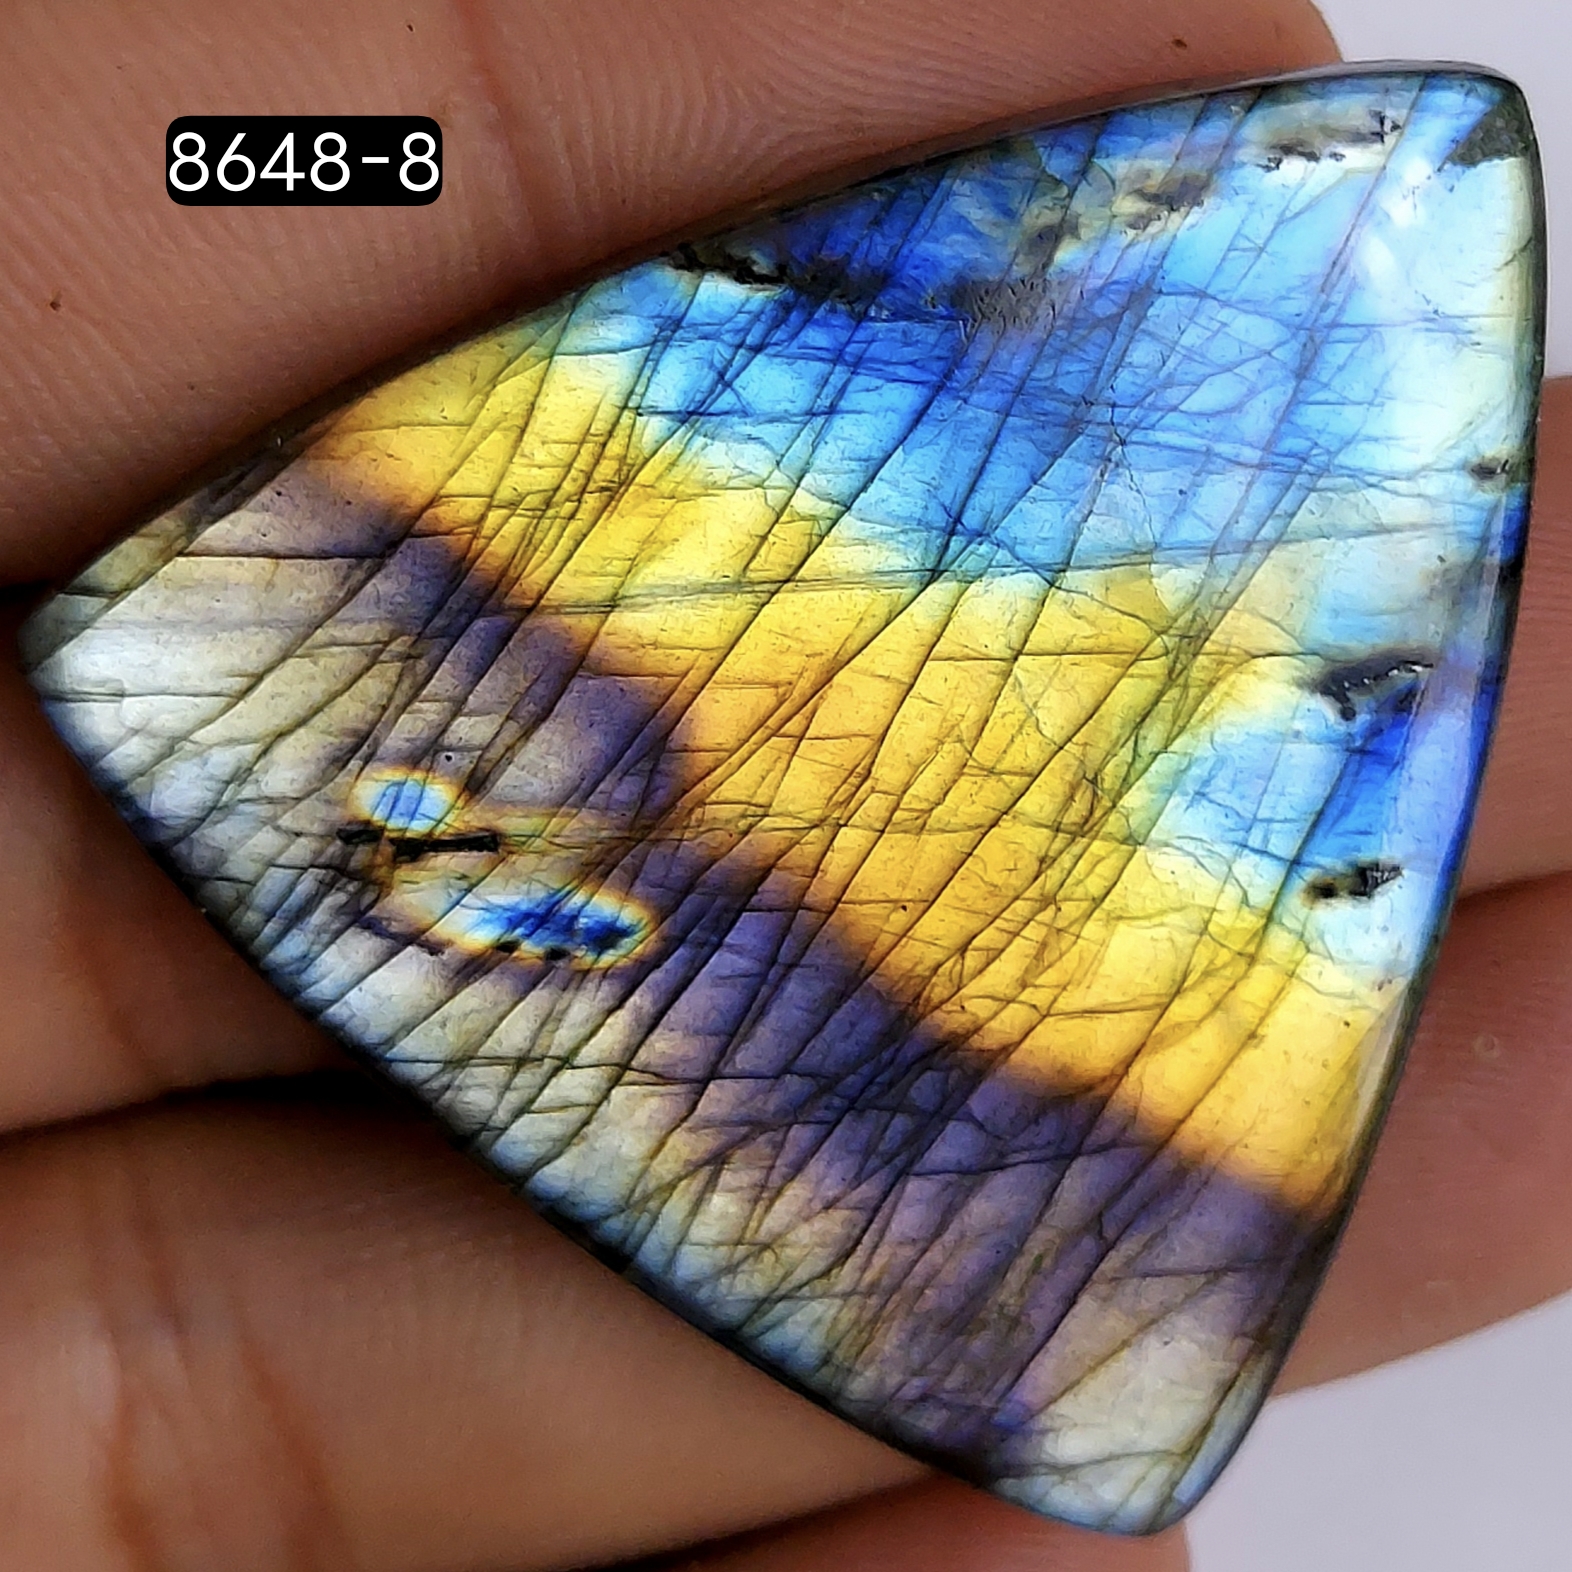 1Pcs 68Cts Natural Multi Fire Labradorite Fancy Shape Cabochon Loose Gemstone Lot For Jewelry Making 41x40mm #8648-8